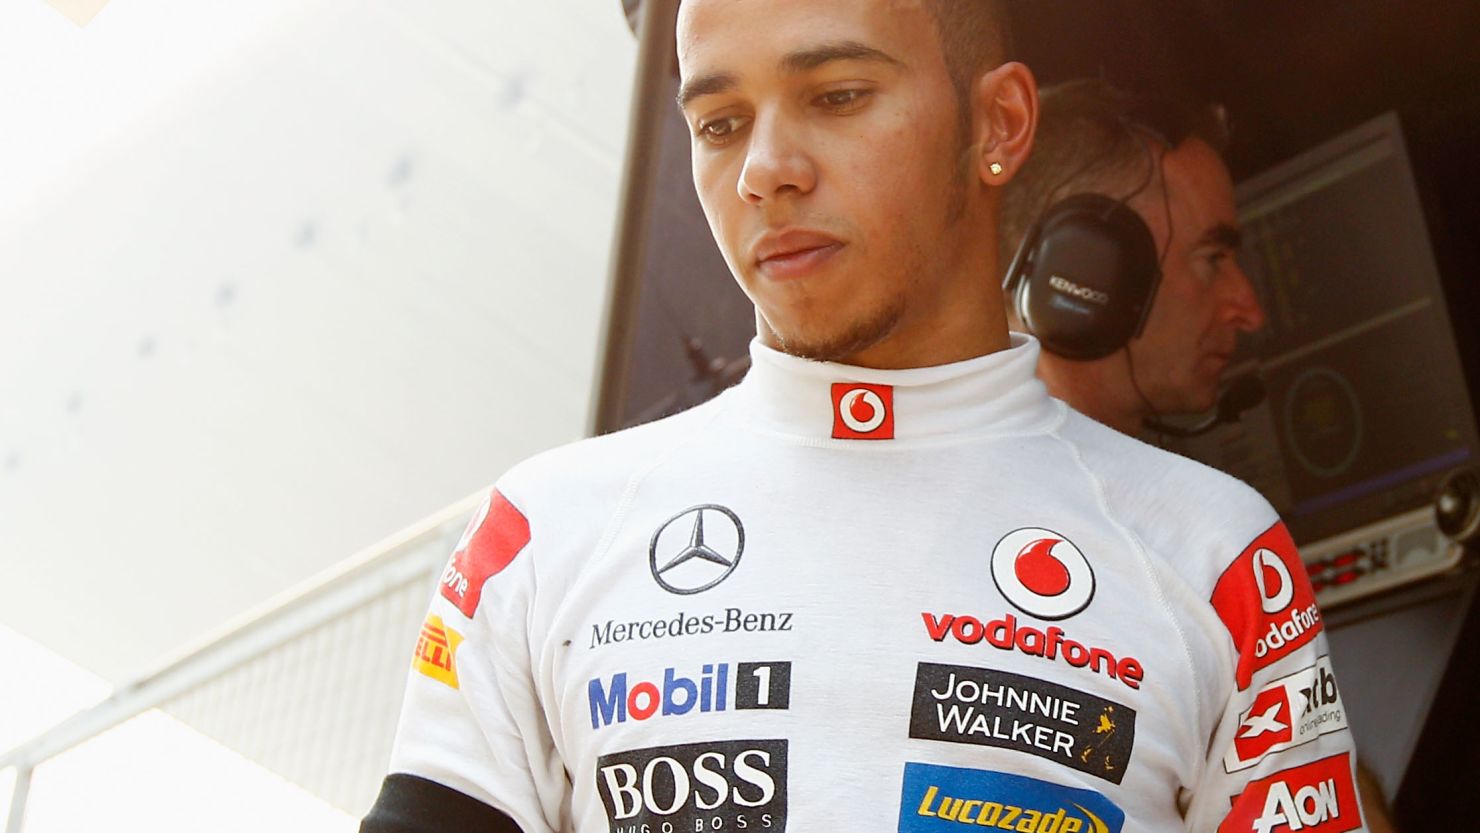 McLaren's Lewis Hamilton was Formula One world champion in 2008, but has won only two races this year.